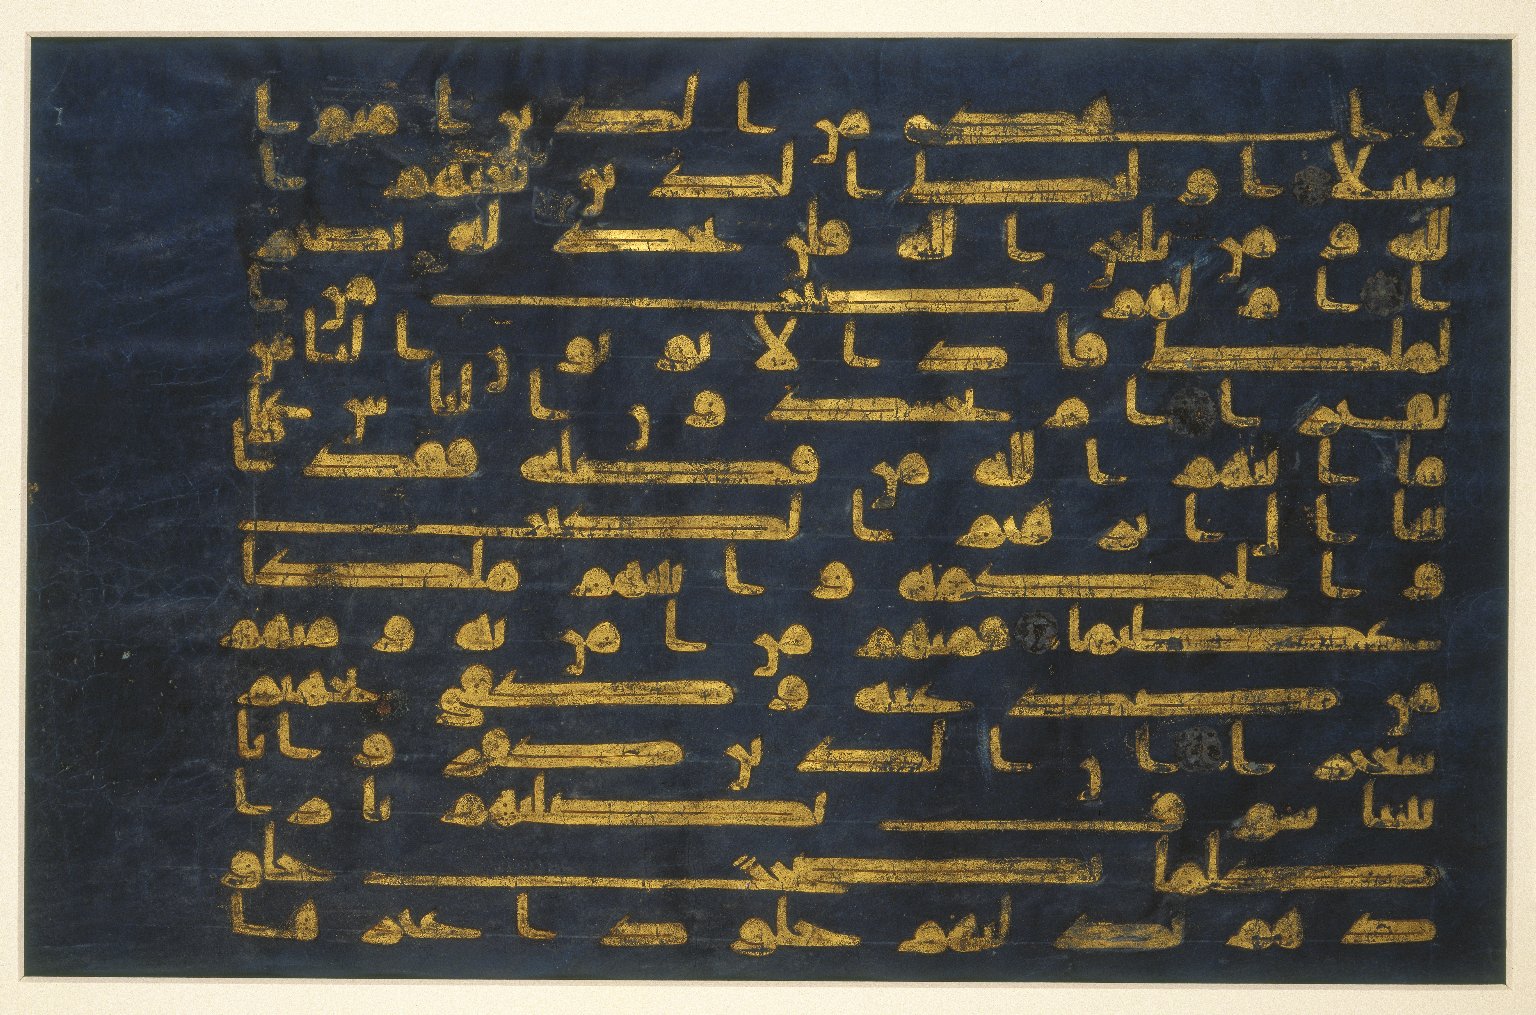 Leaf from the Blue Quran, Brooklyn Museum of Art